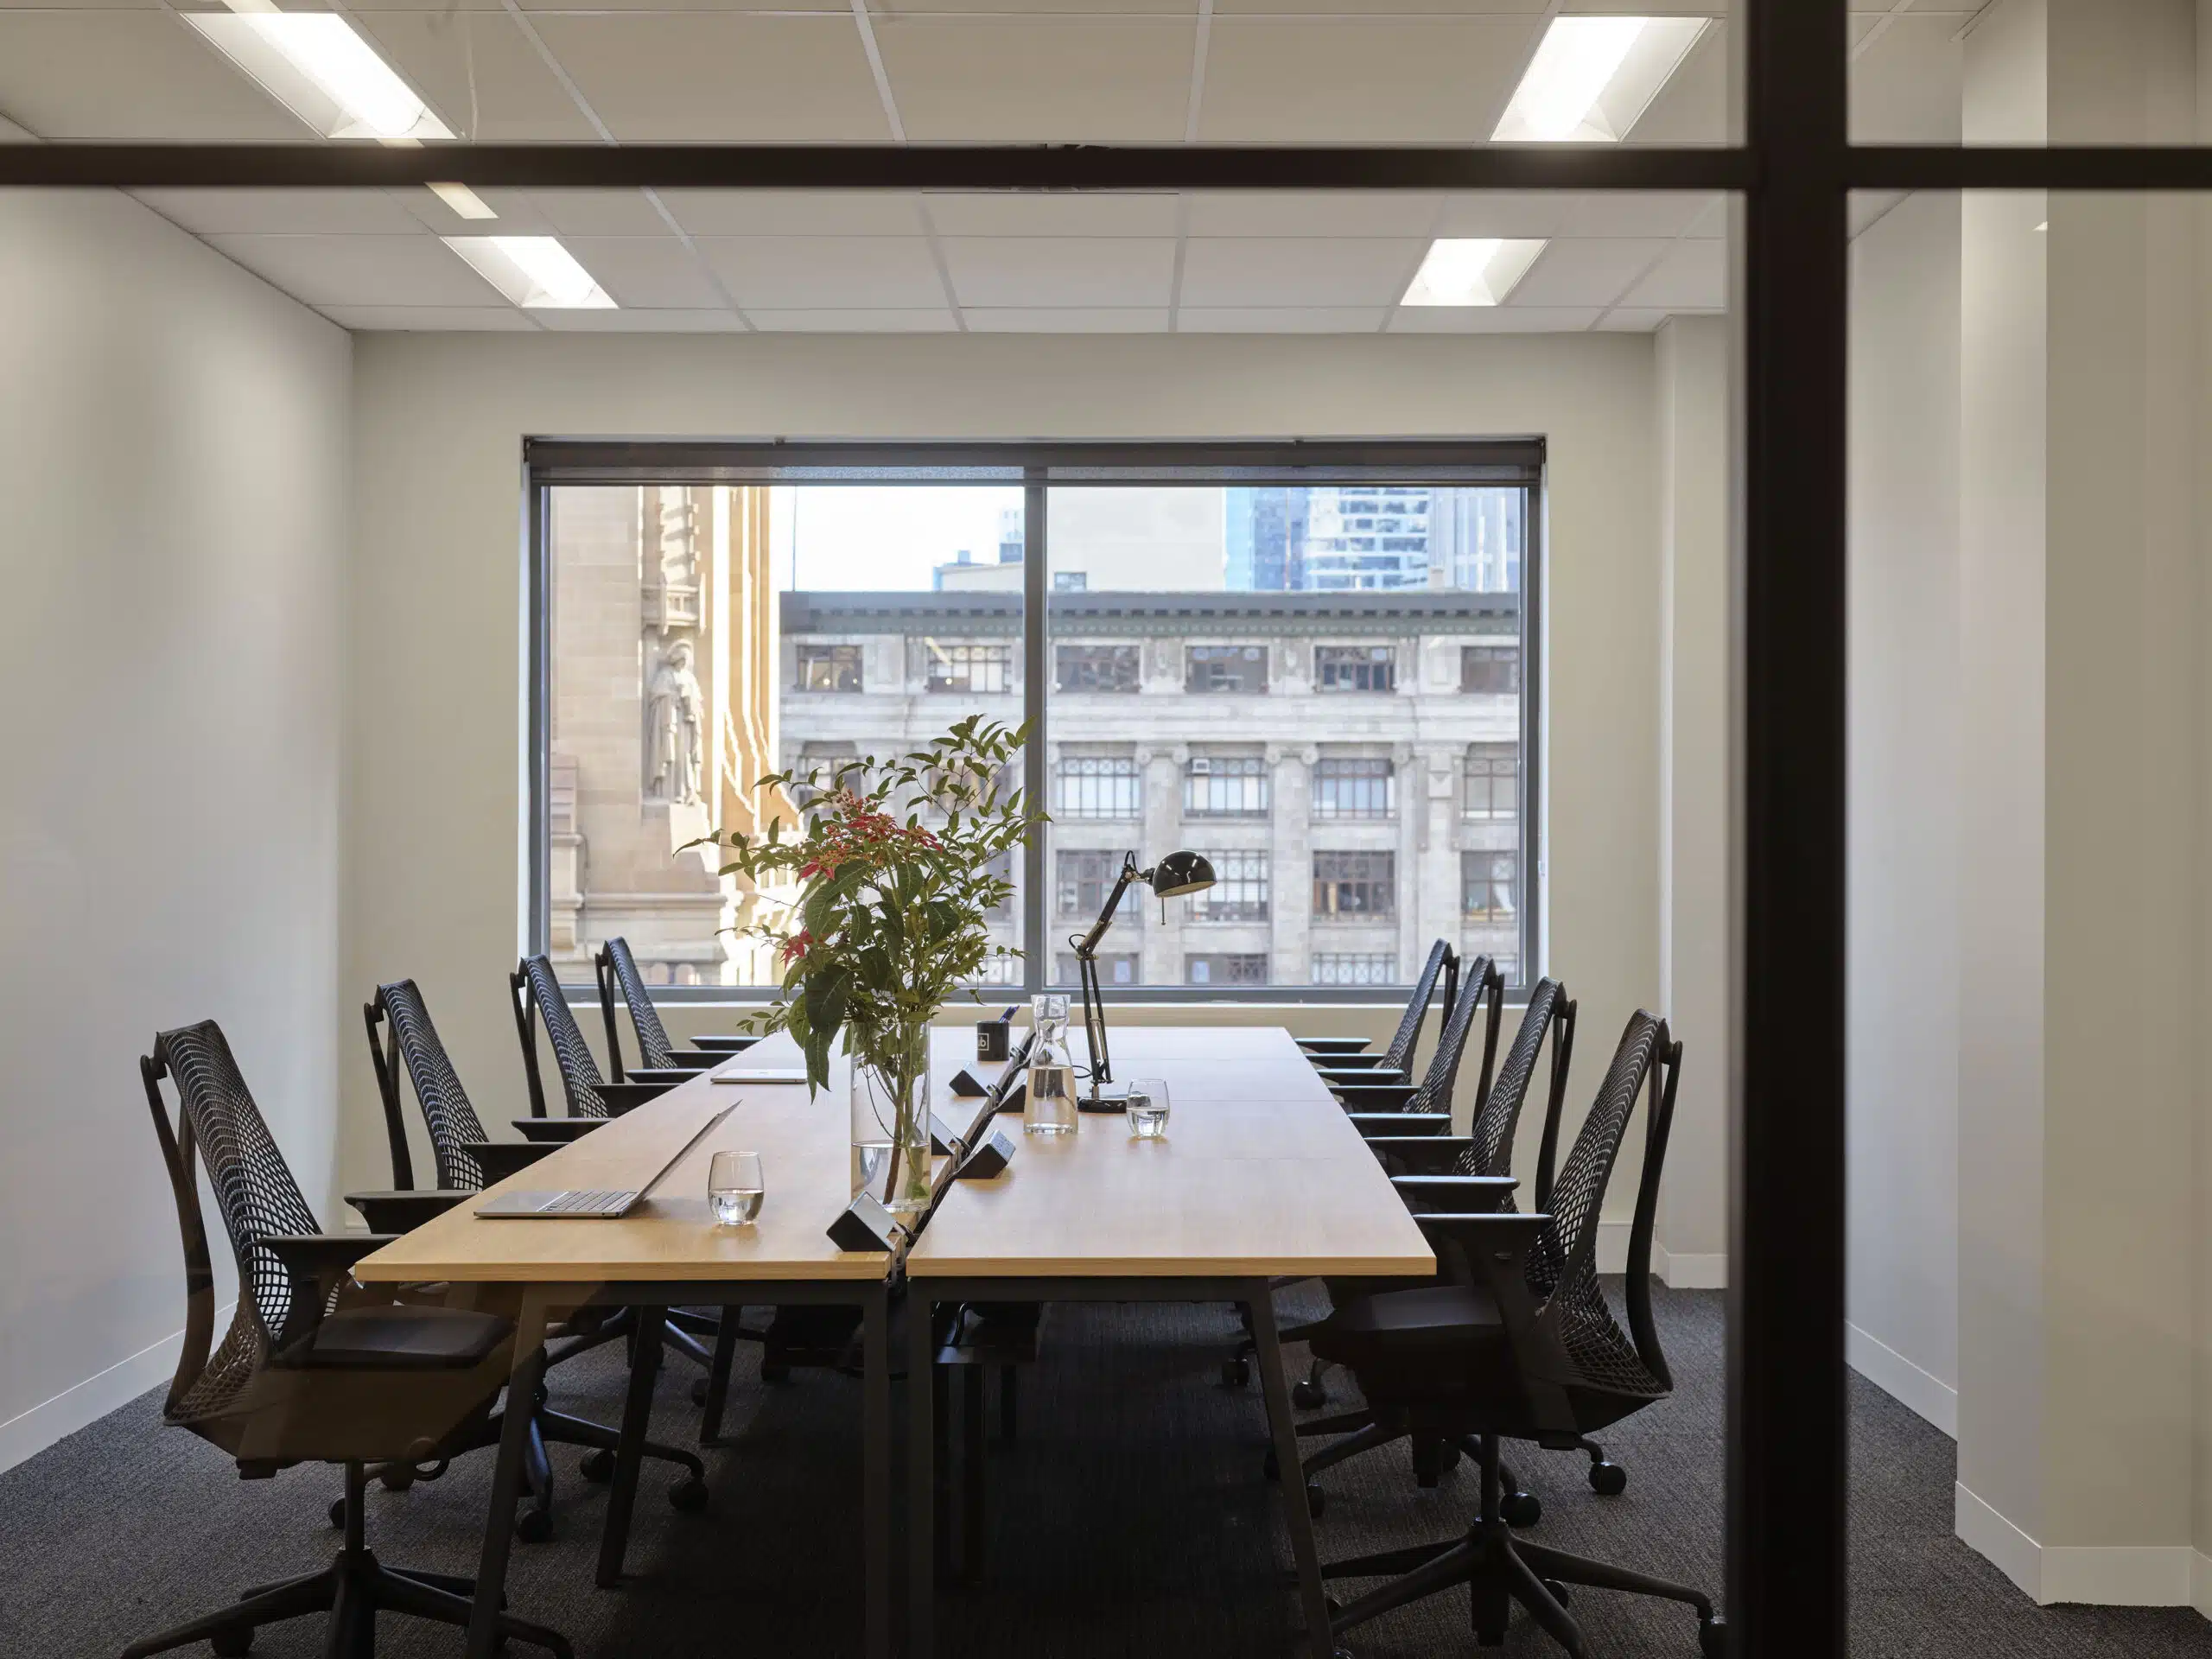  Melbourne Meeting Rooms & Events Spaces For Hire Find your ideal space for your next meeting or event in Melbourne.